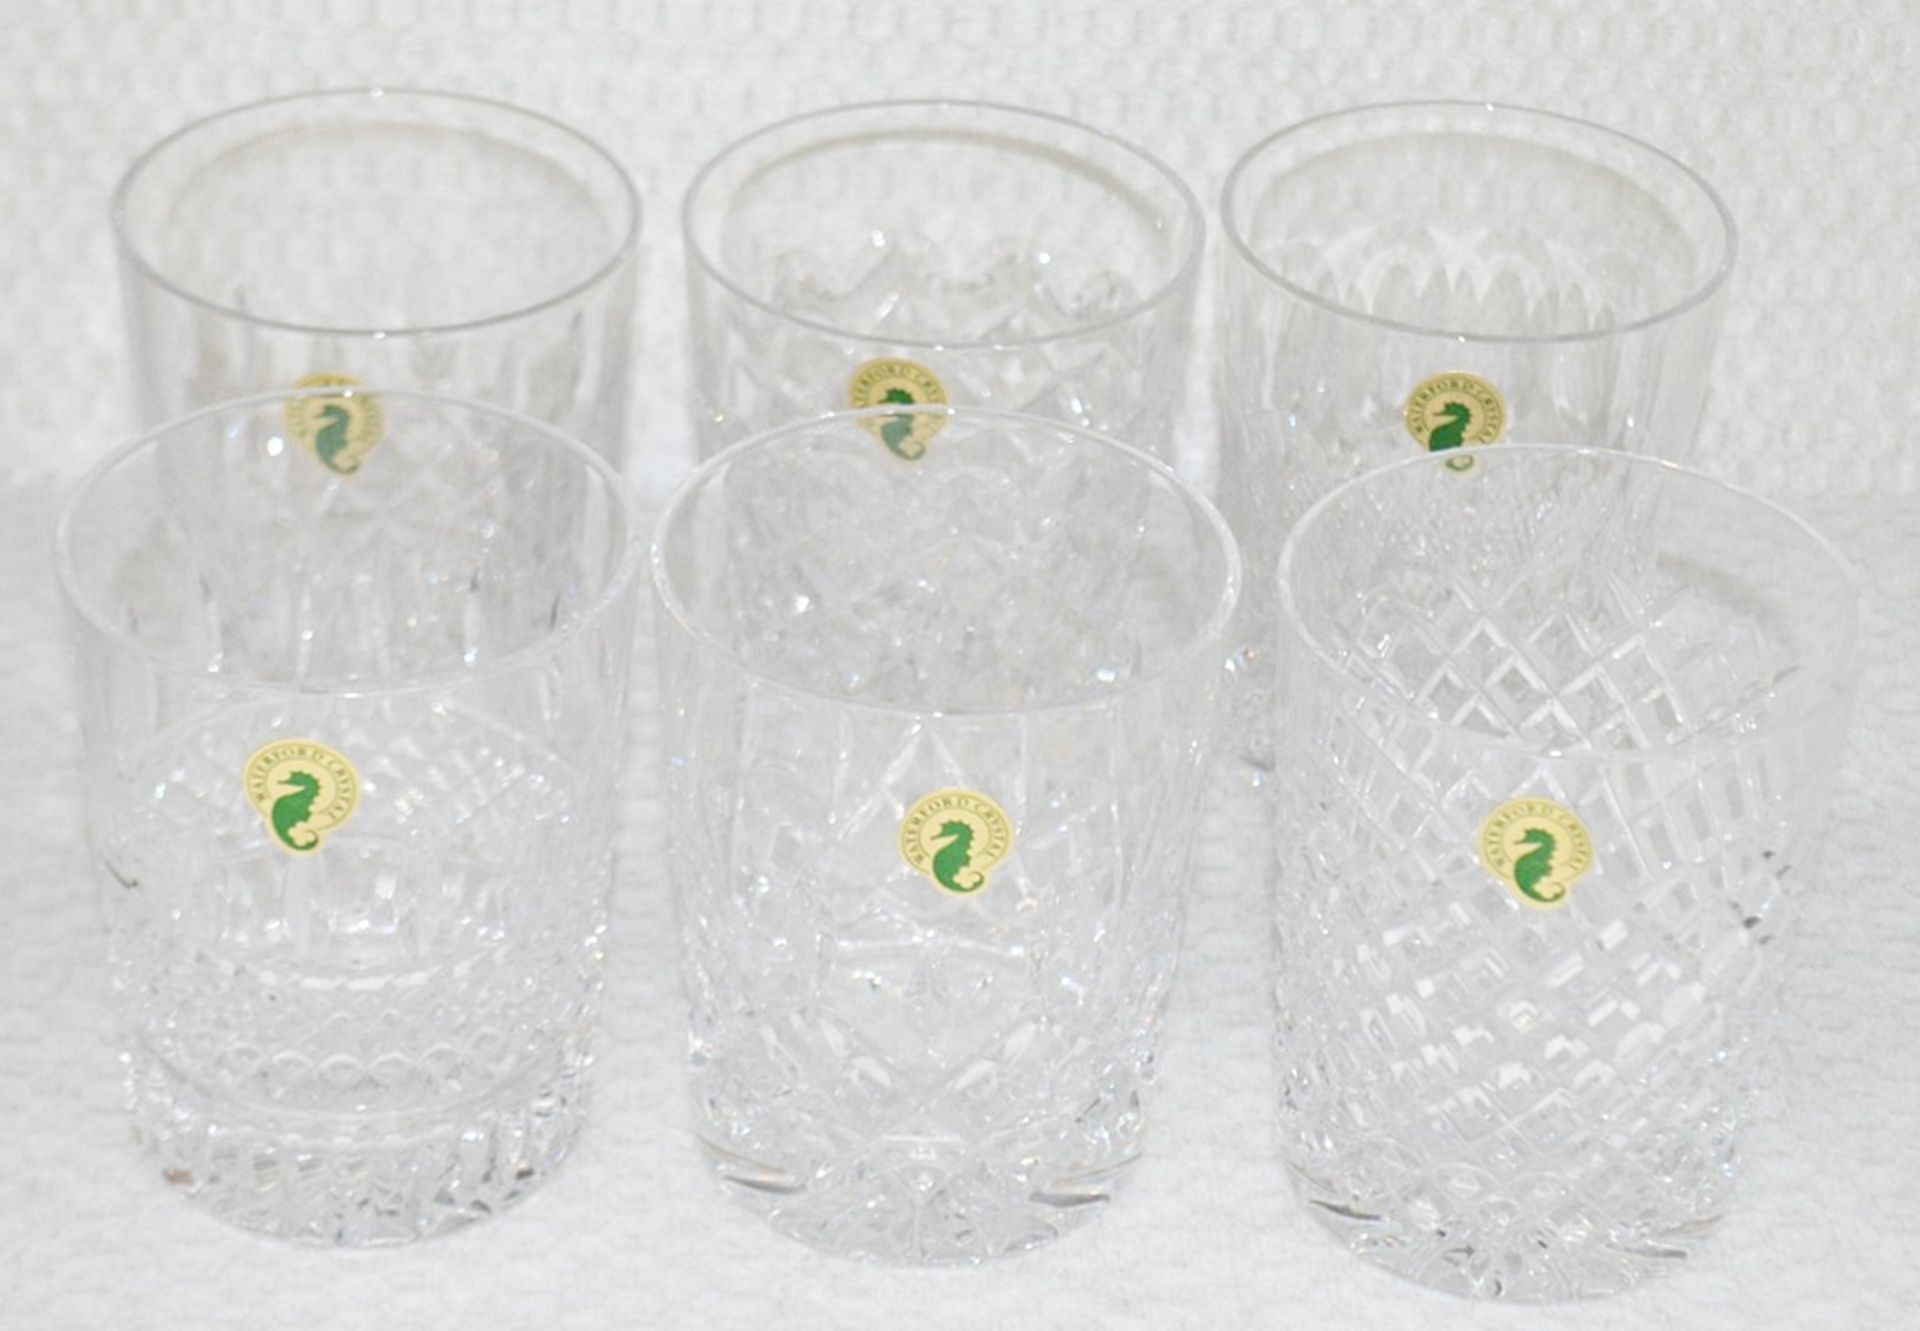 Set of 6 x WATERFORD CRYSTAL 'Lismore' Connoisseur Heritage Tumblers - 400ml - Original RRP £295.00 - Image 2 of 7